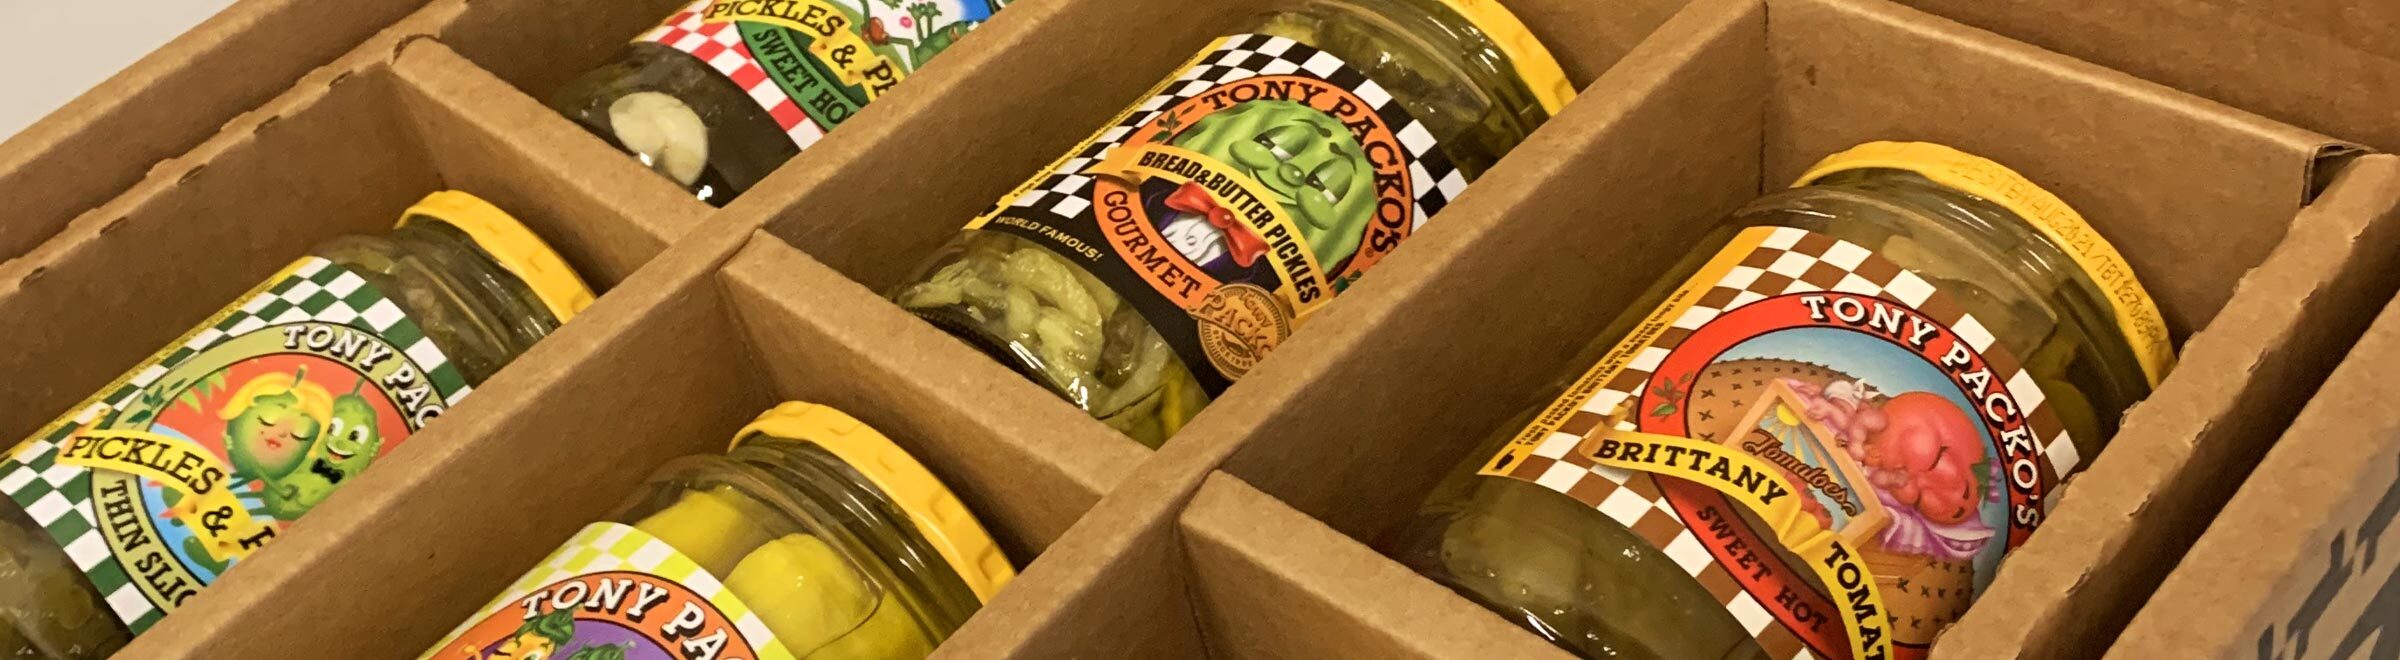 Tony Packo's Gift Pack open box with a variety of Packos Pickle's